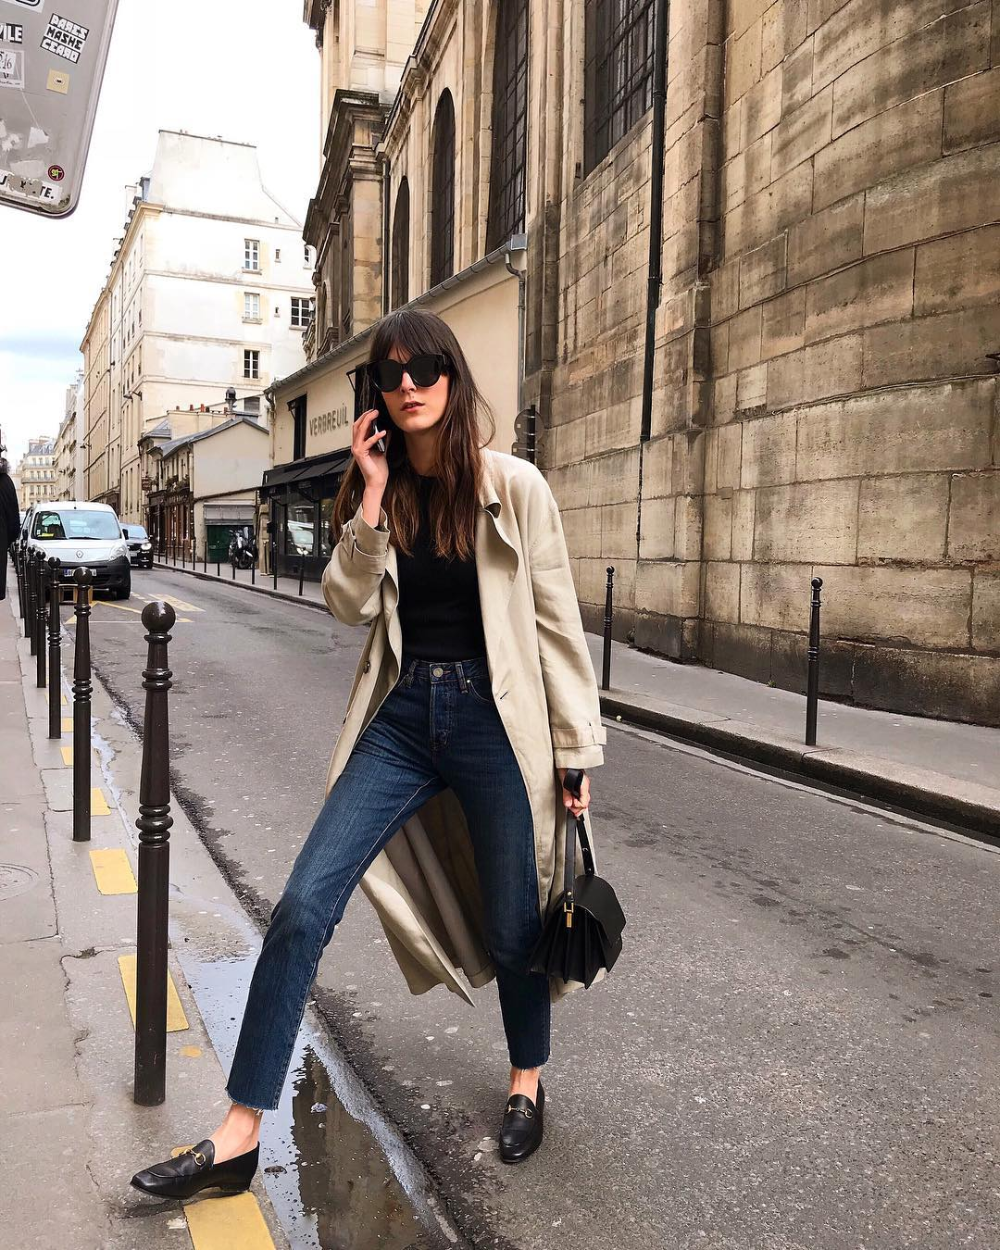 15 French Style Influencers Who Nail the Effortless Parisian Look - 15 French Style Influencers Who Nail the Effortless Parisian Look -   parisian style Autumn